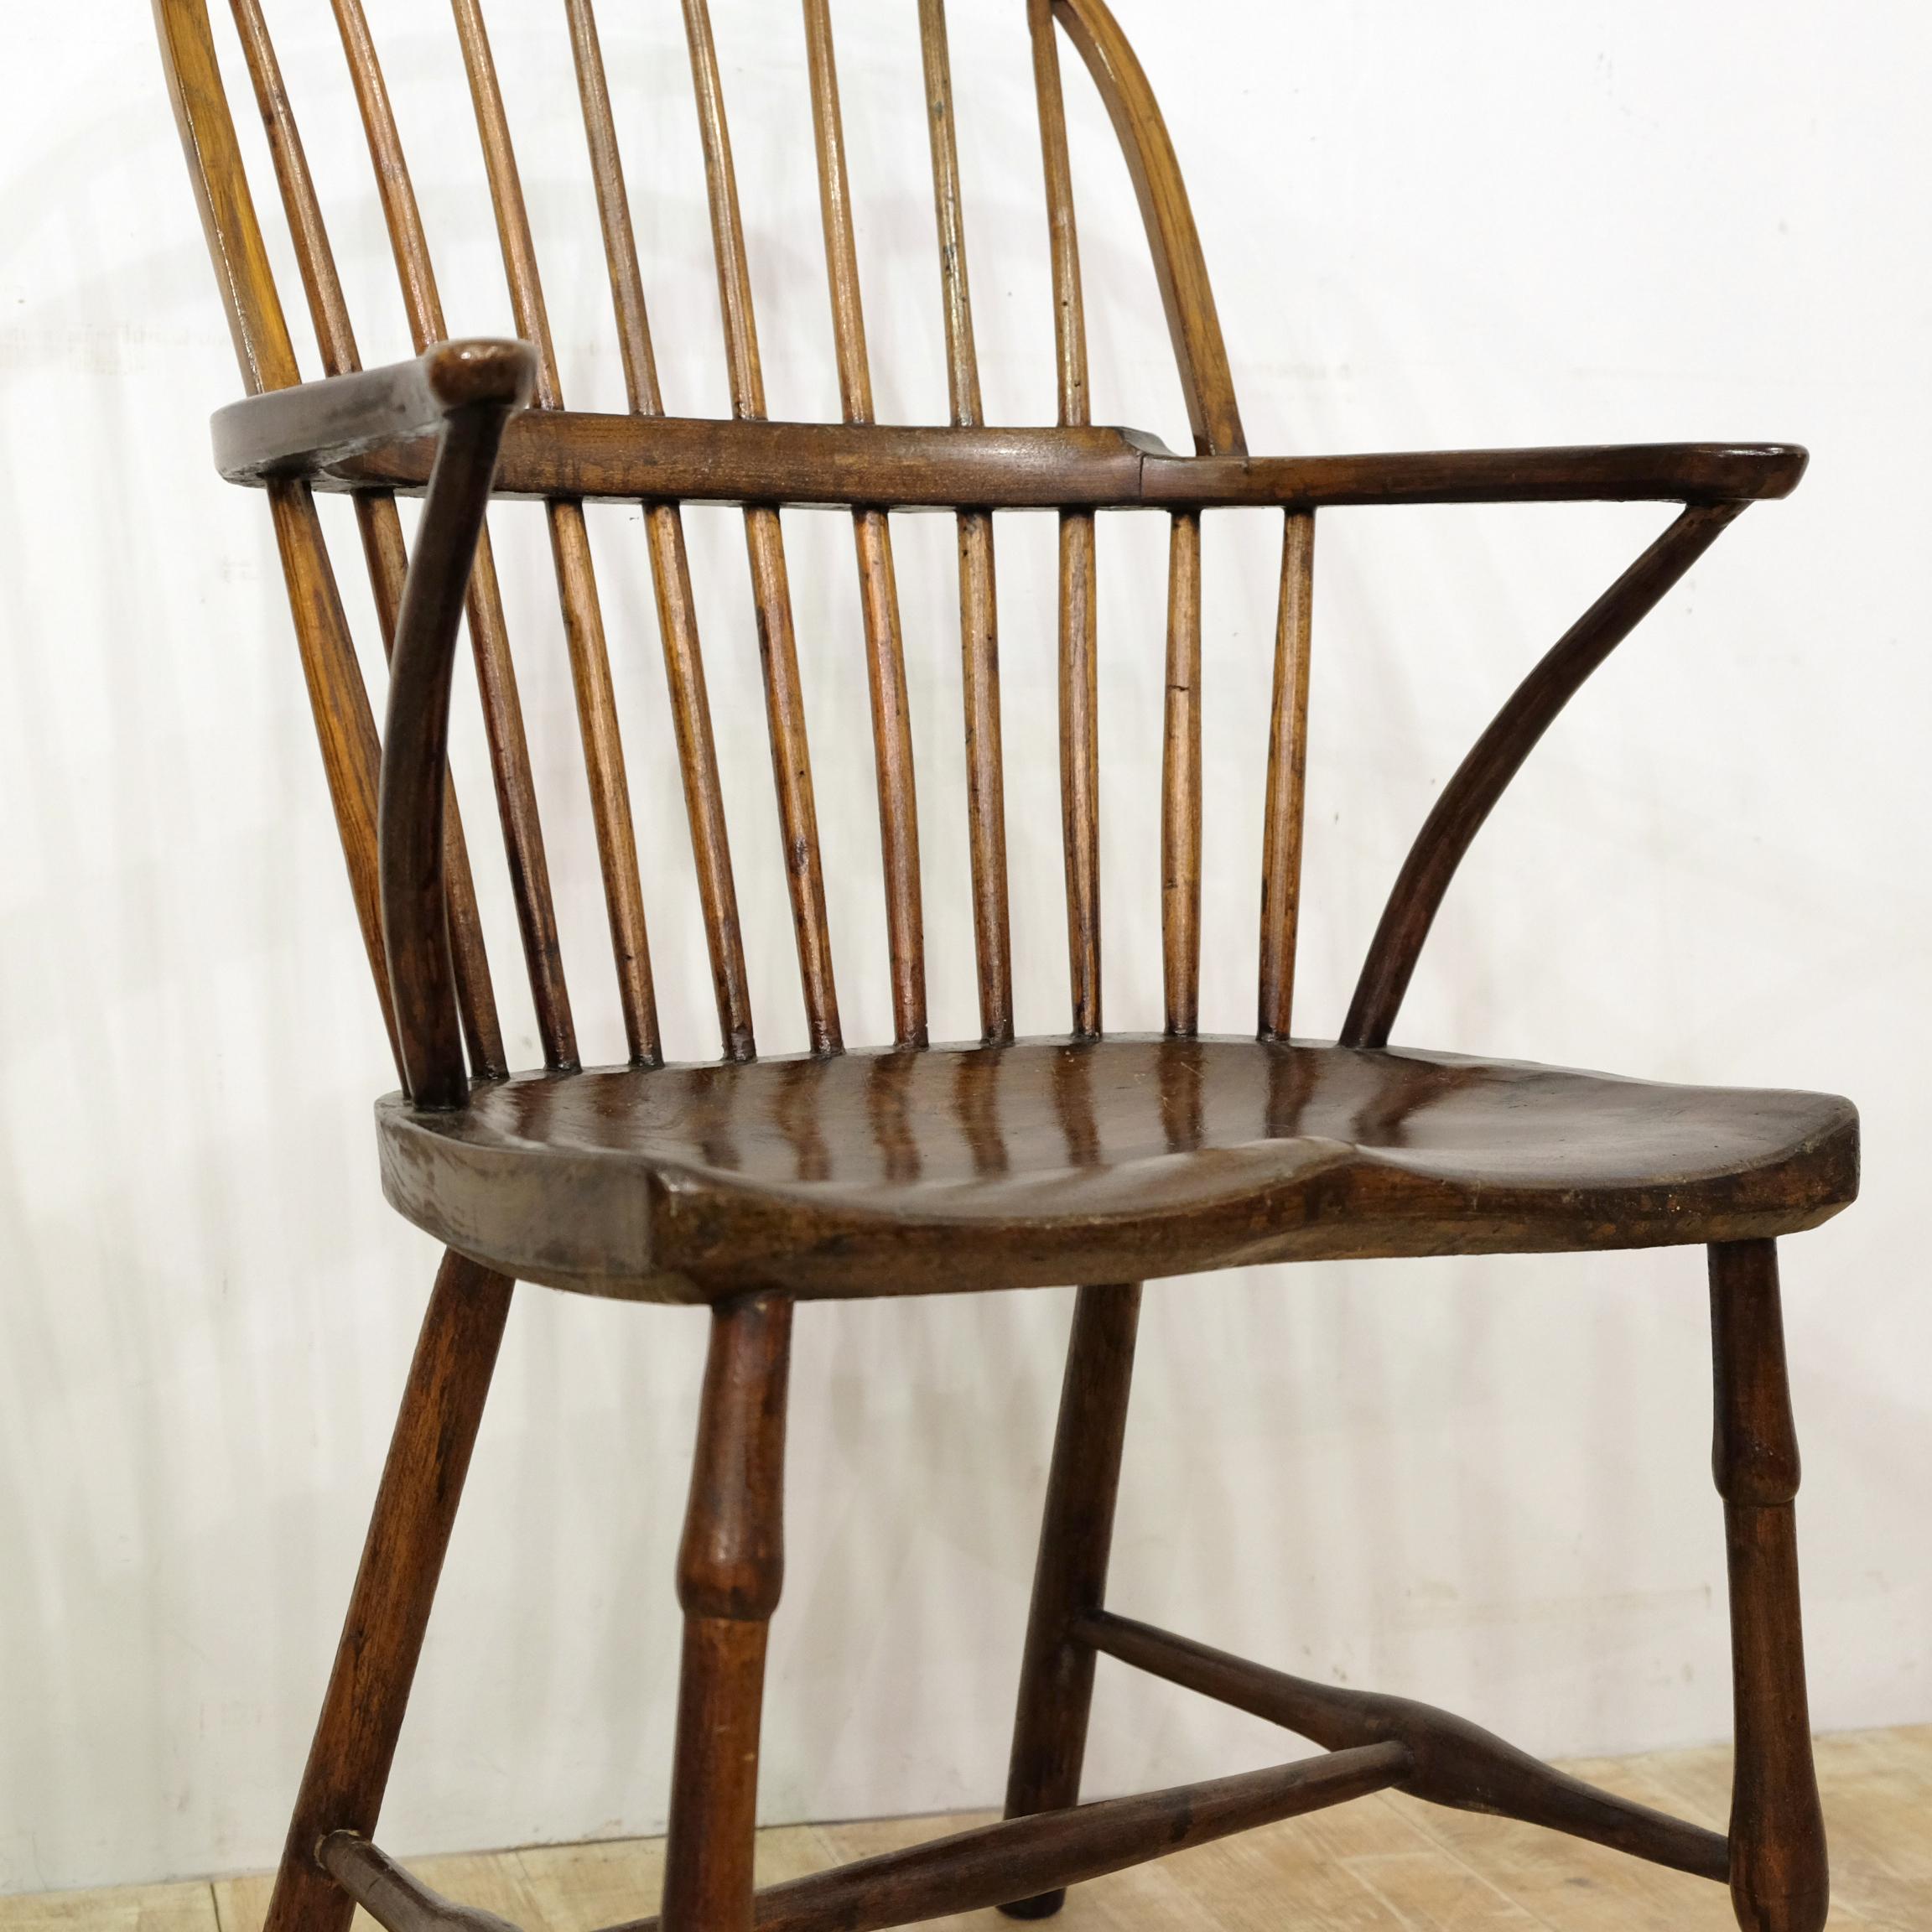 English West Country Mid-19th Century Stickback Windsor Chair 3